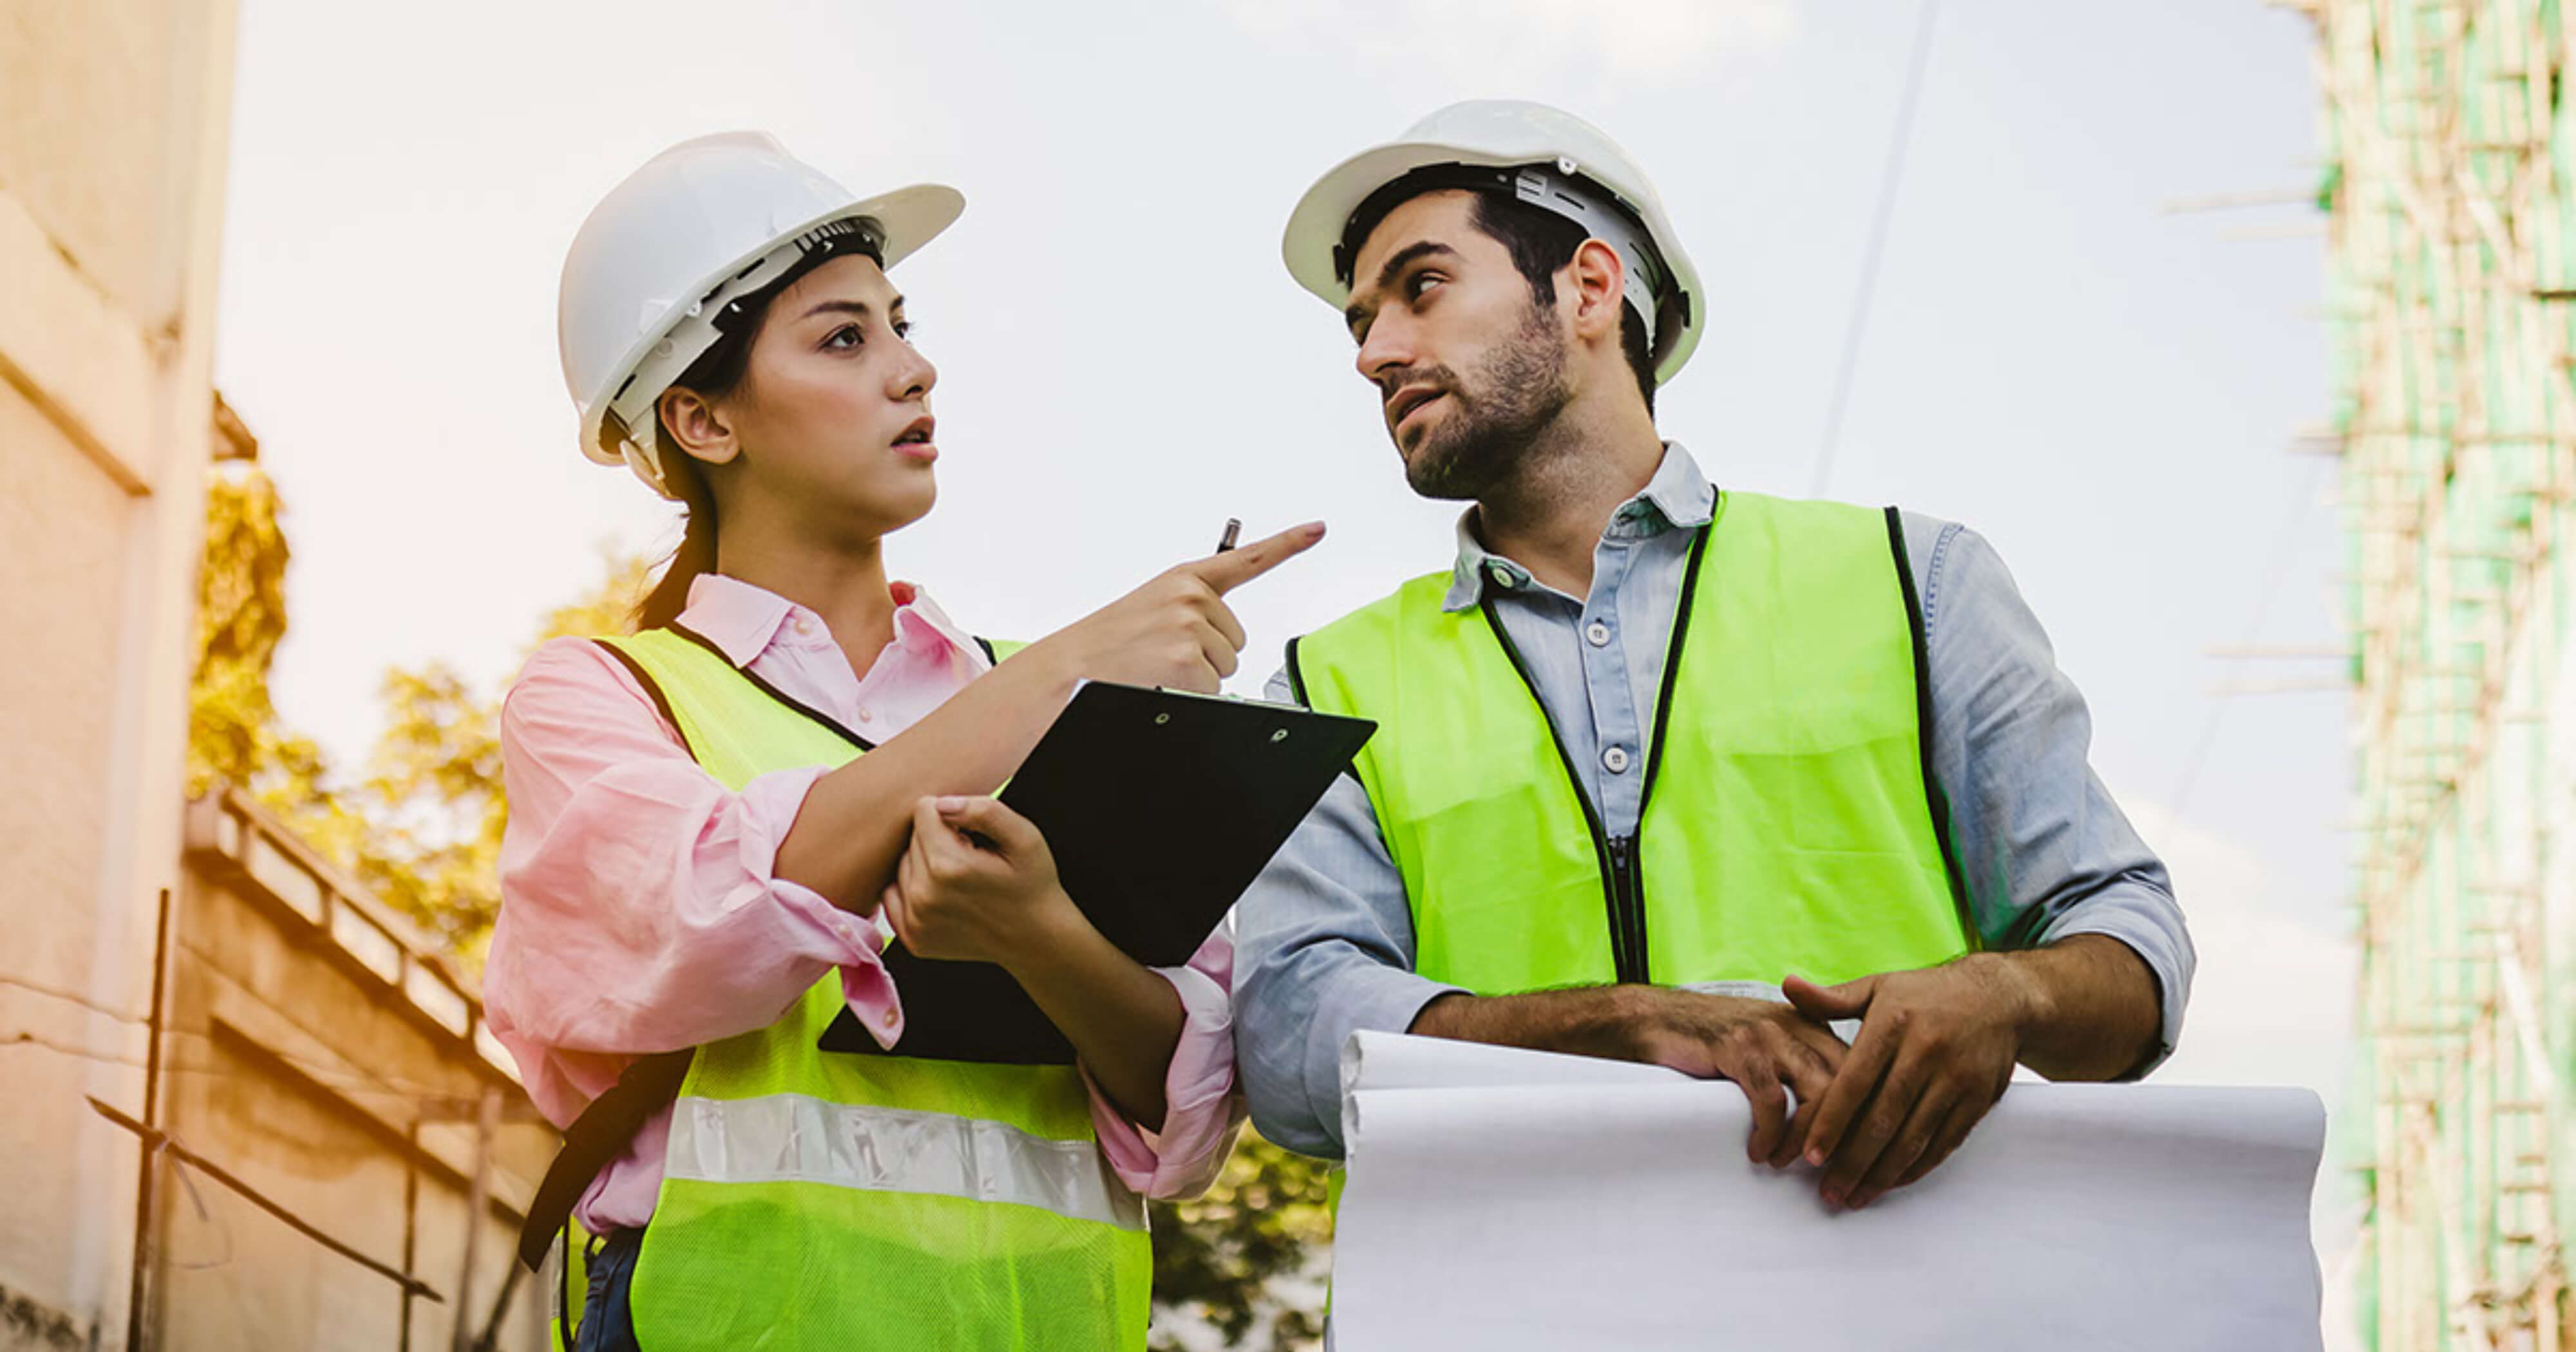 Woman and man construction workers discussing blueprints.